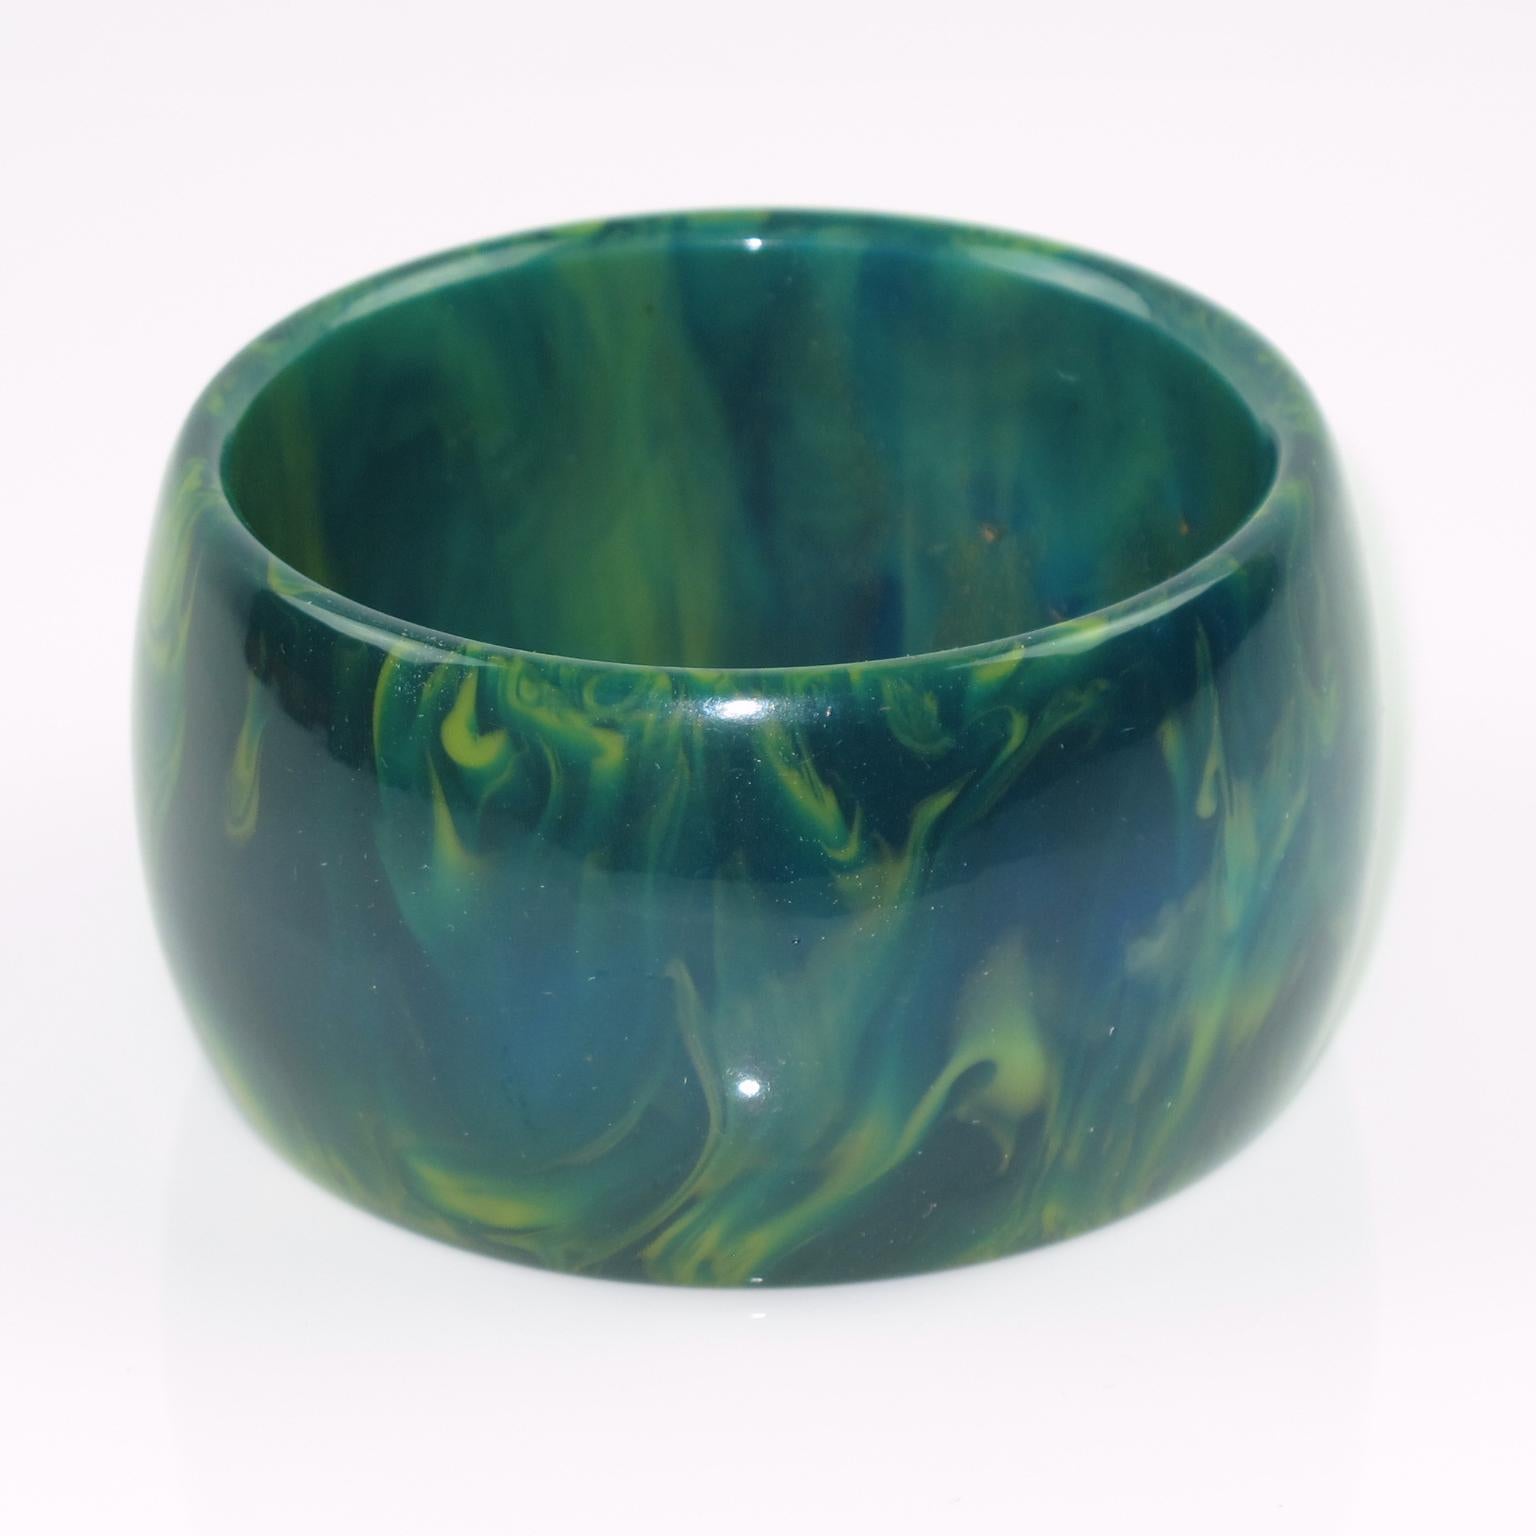 Gorgeous oversized blue-moon marble Bakelite bracelet bangle. Chunky wide domed shape. Intense blue marble tone with green and white cloudy swirling. 
Measurements: Inside across is 2.5 in. diameter (6.4 cm) - outside across is 3.07 in. diameter